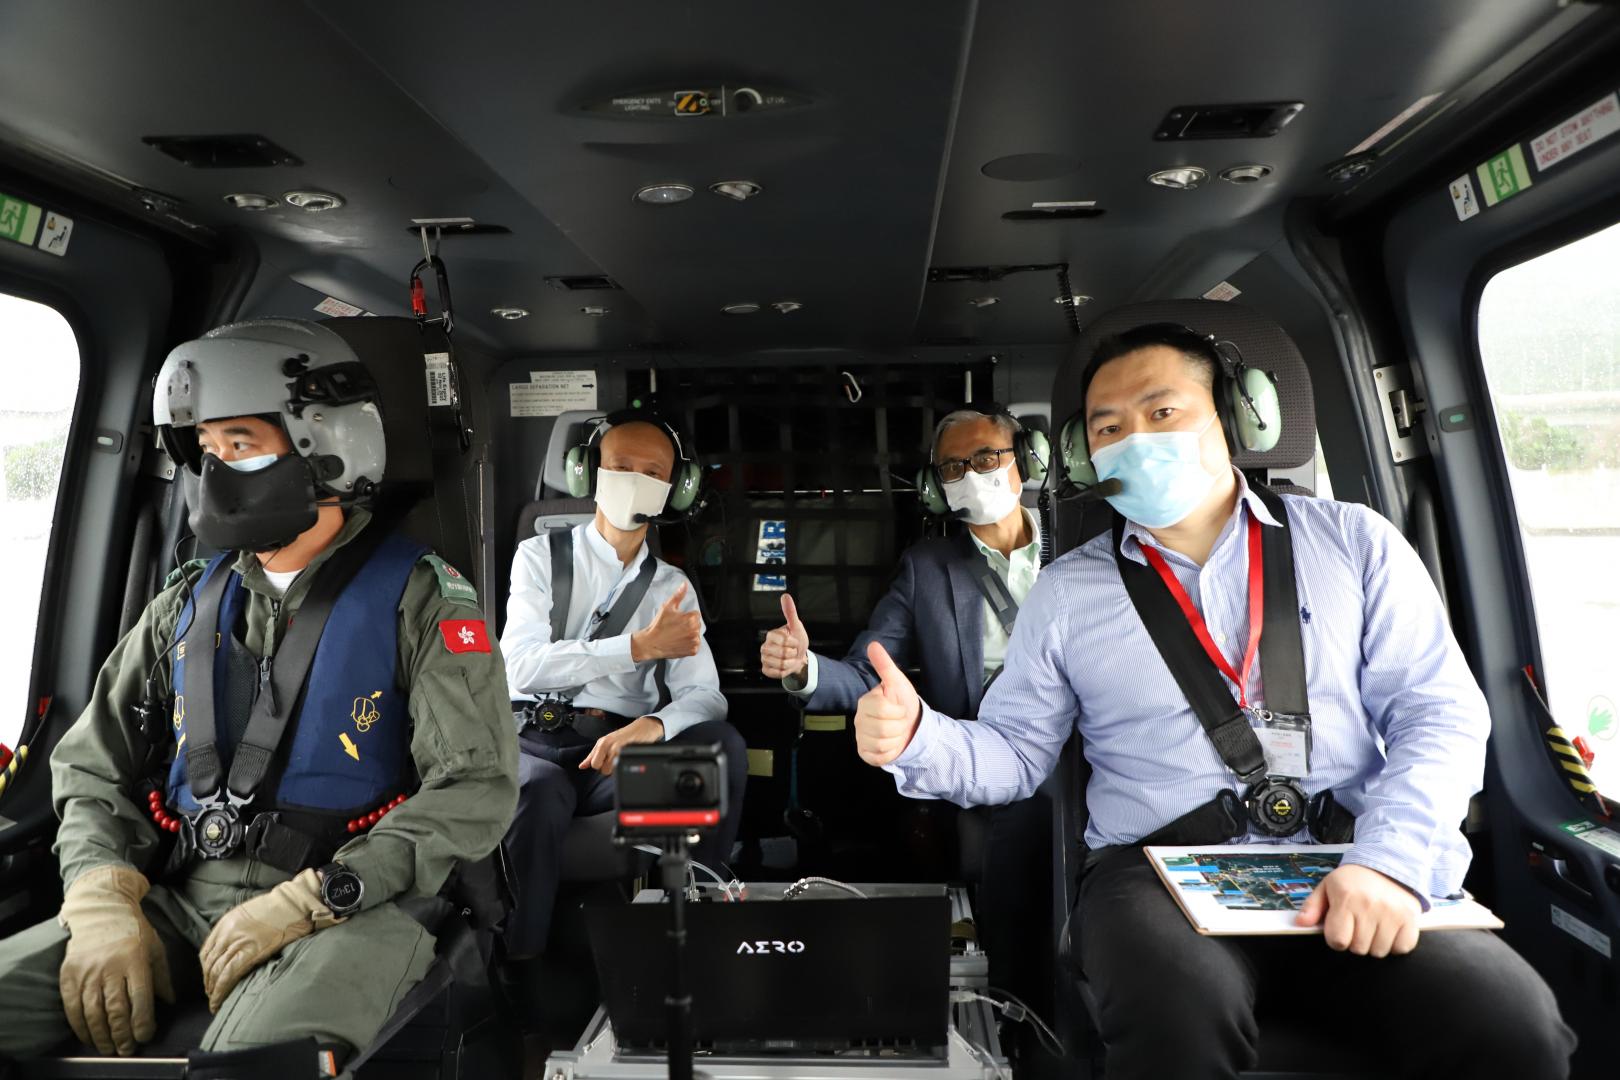 Secretary for the Environment Mr. WONG Kam-Sing (Back Left), HKUST President Prof. Wei SHYY (Back Right) and Associate Professor of Environment and Sustainability at HKUST Prof. NING Zhi (Front Right) takes a helicopter ride late last month to learn about the research progress.